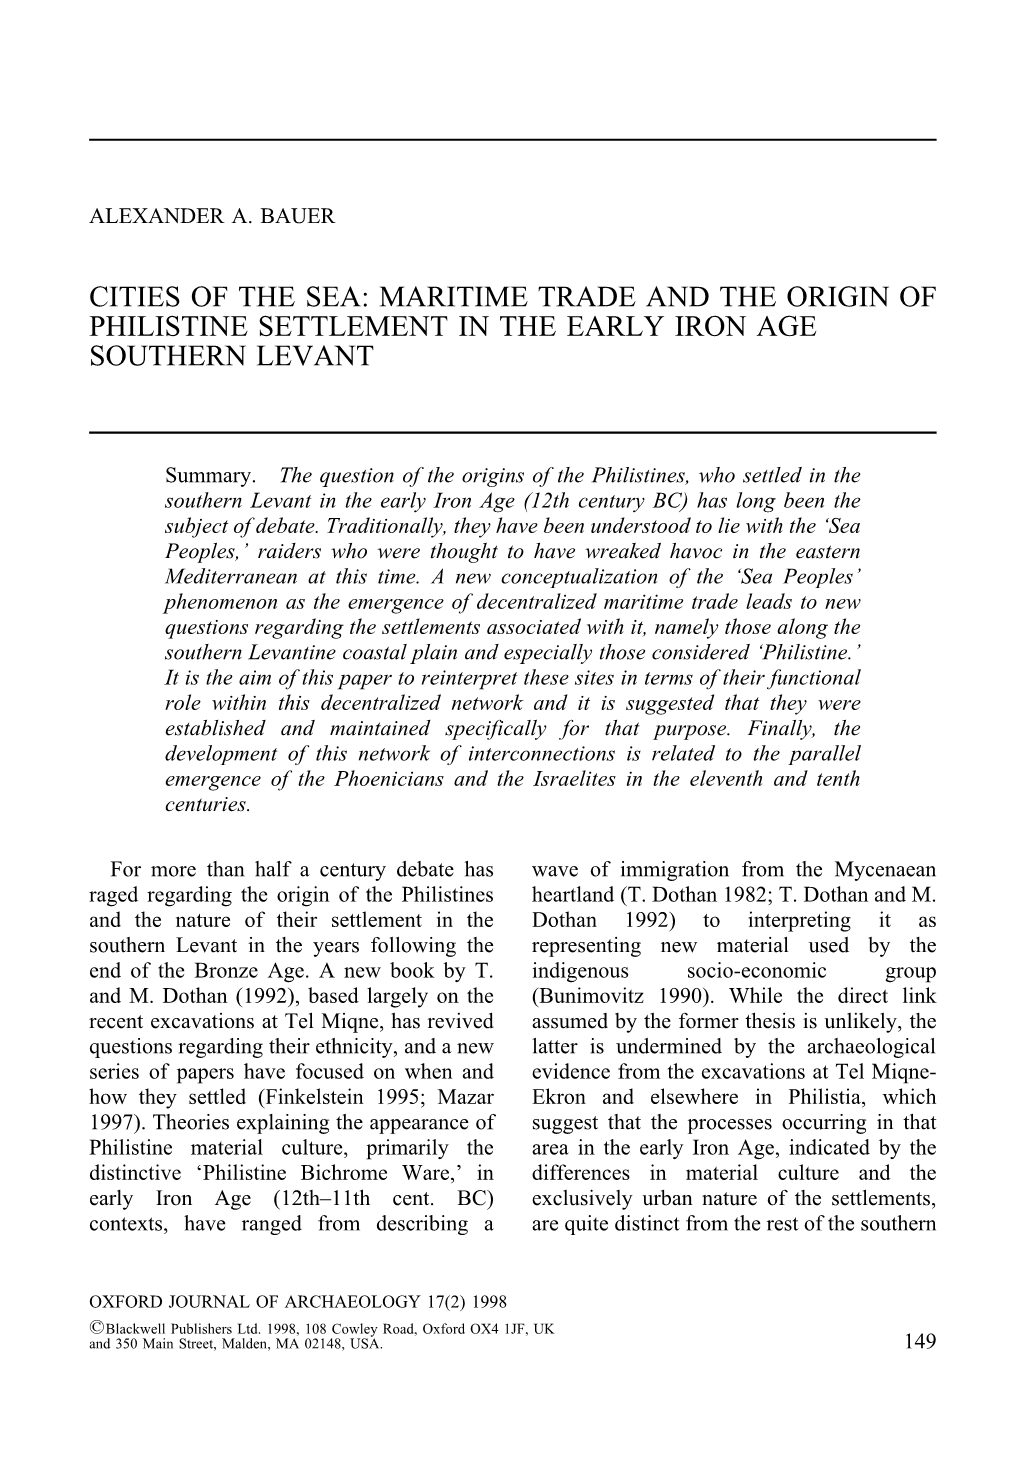 Maritime Trade and the Origin of Philistine Settlement in the Early Iron Age Southern Levant